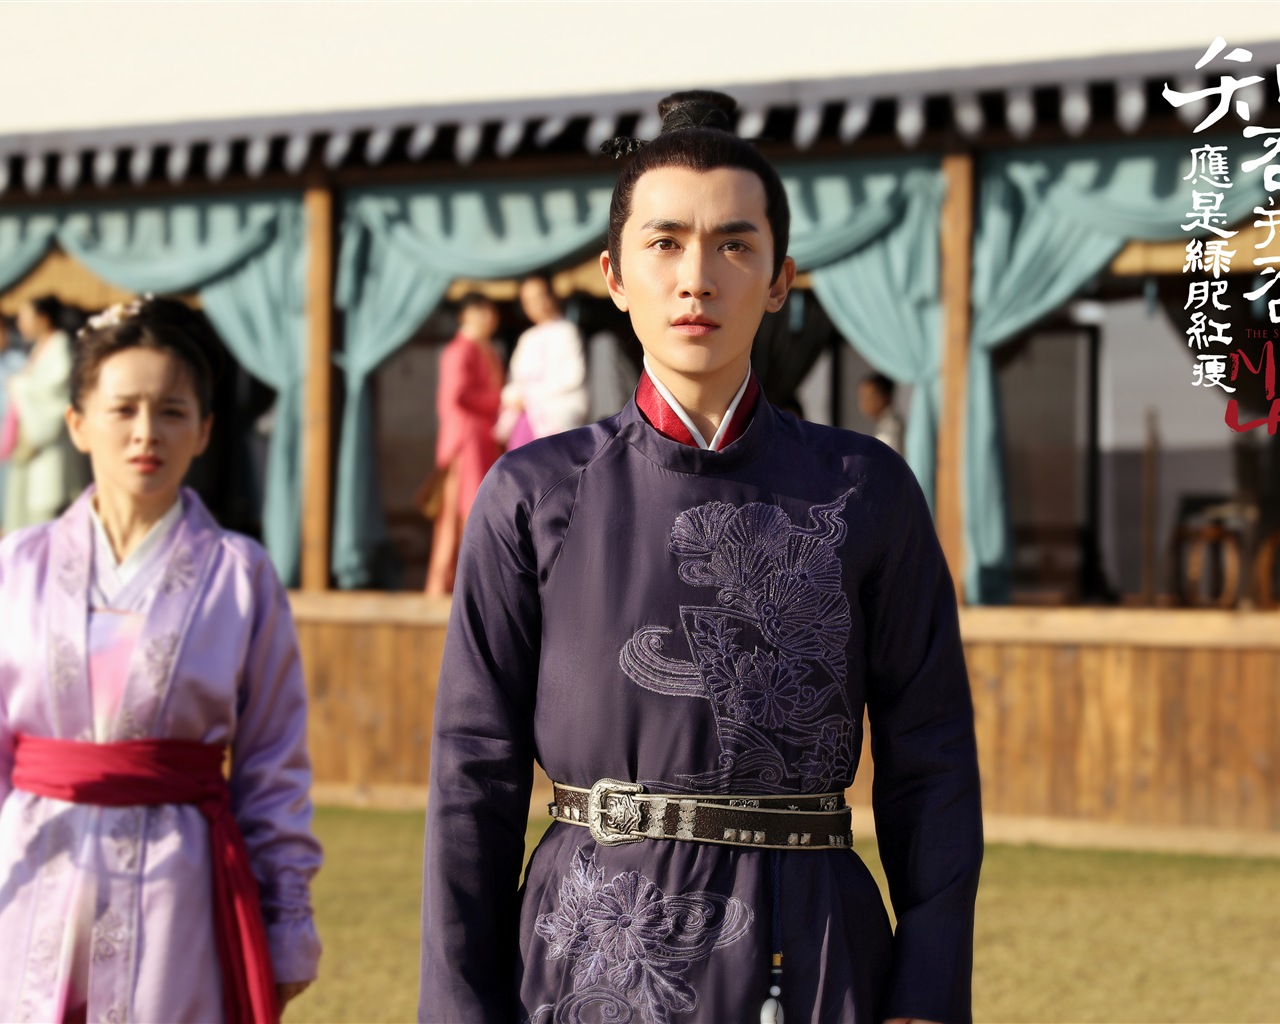 The Story Of MingLan, TV series HD wallpapers #38 - 1280x1024